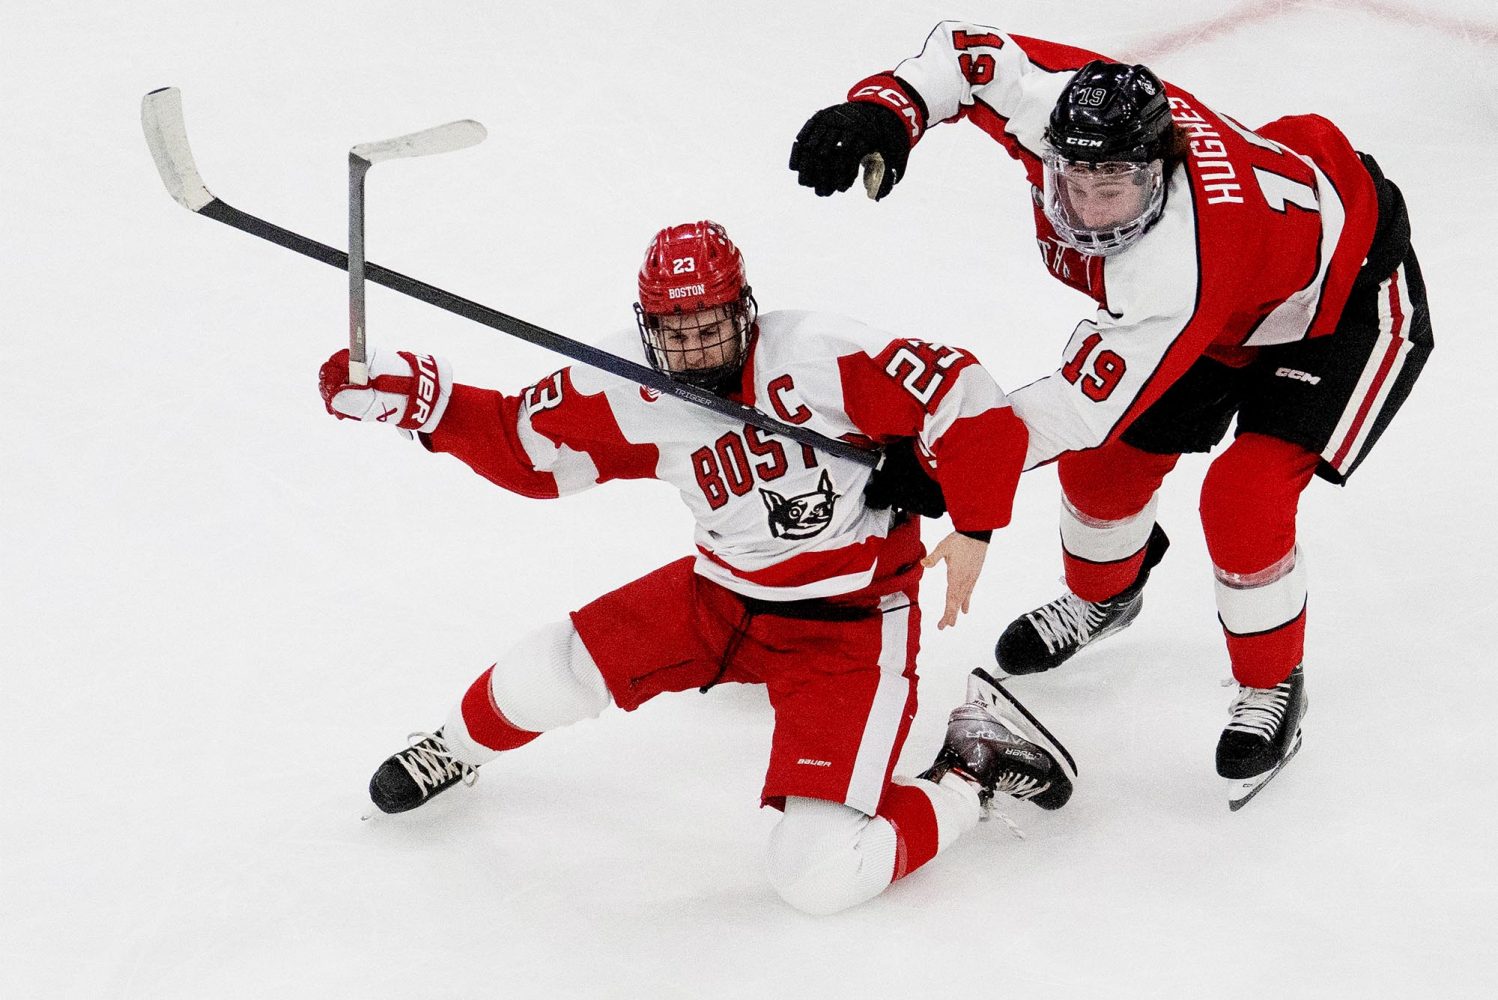 Terriers captain Domenick Fensore (CAS’23) is wrapped up by Northeastern defenseman Riley Hughes. The Huskies physicality played a large role in scoring their first two goals in Monday’s semifinal.